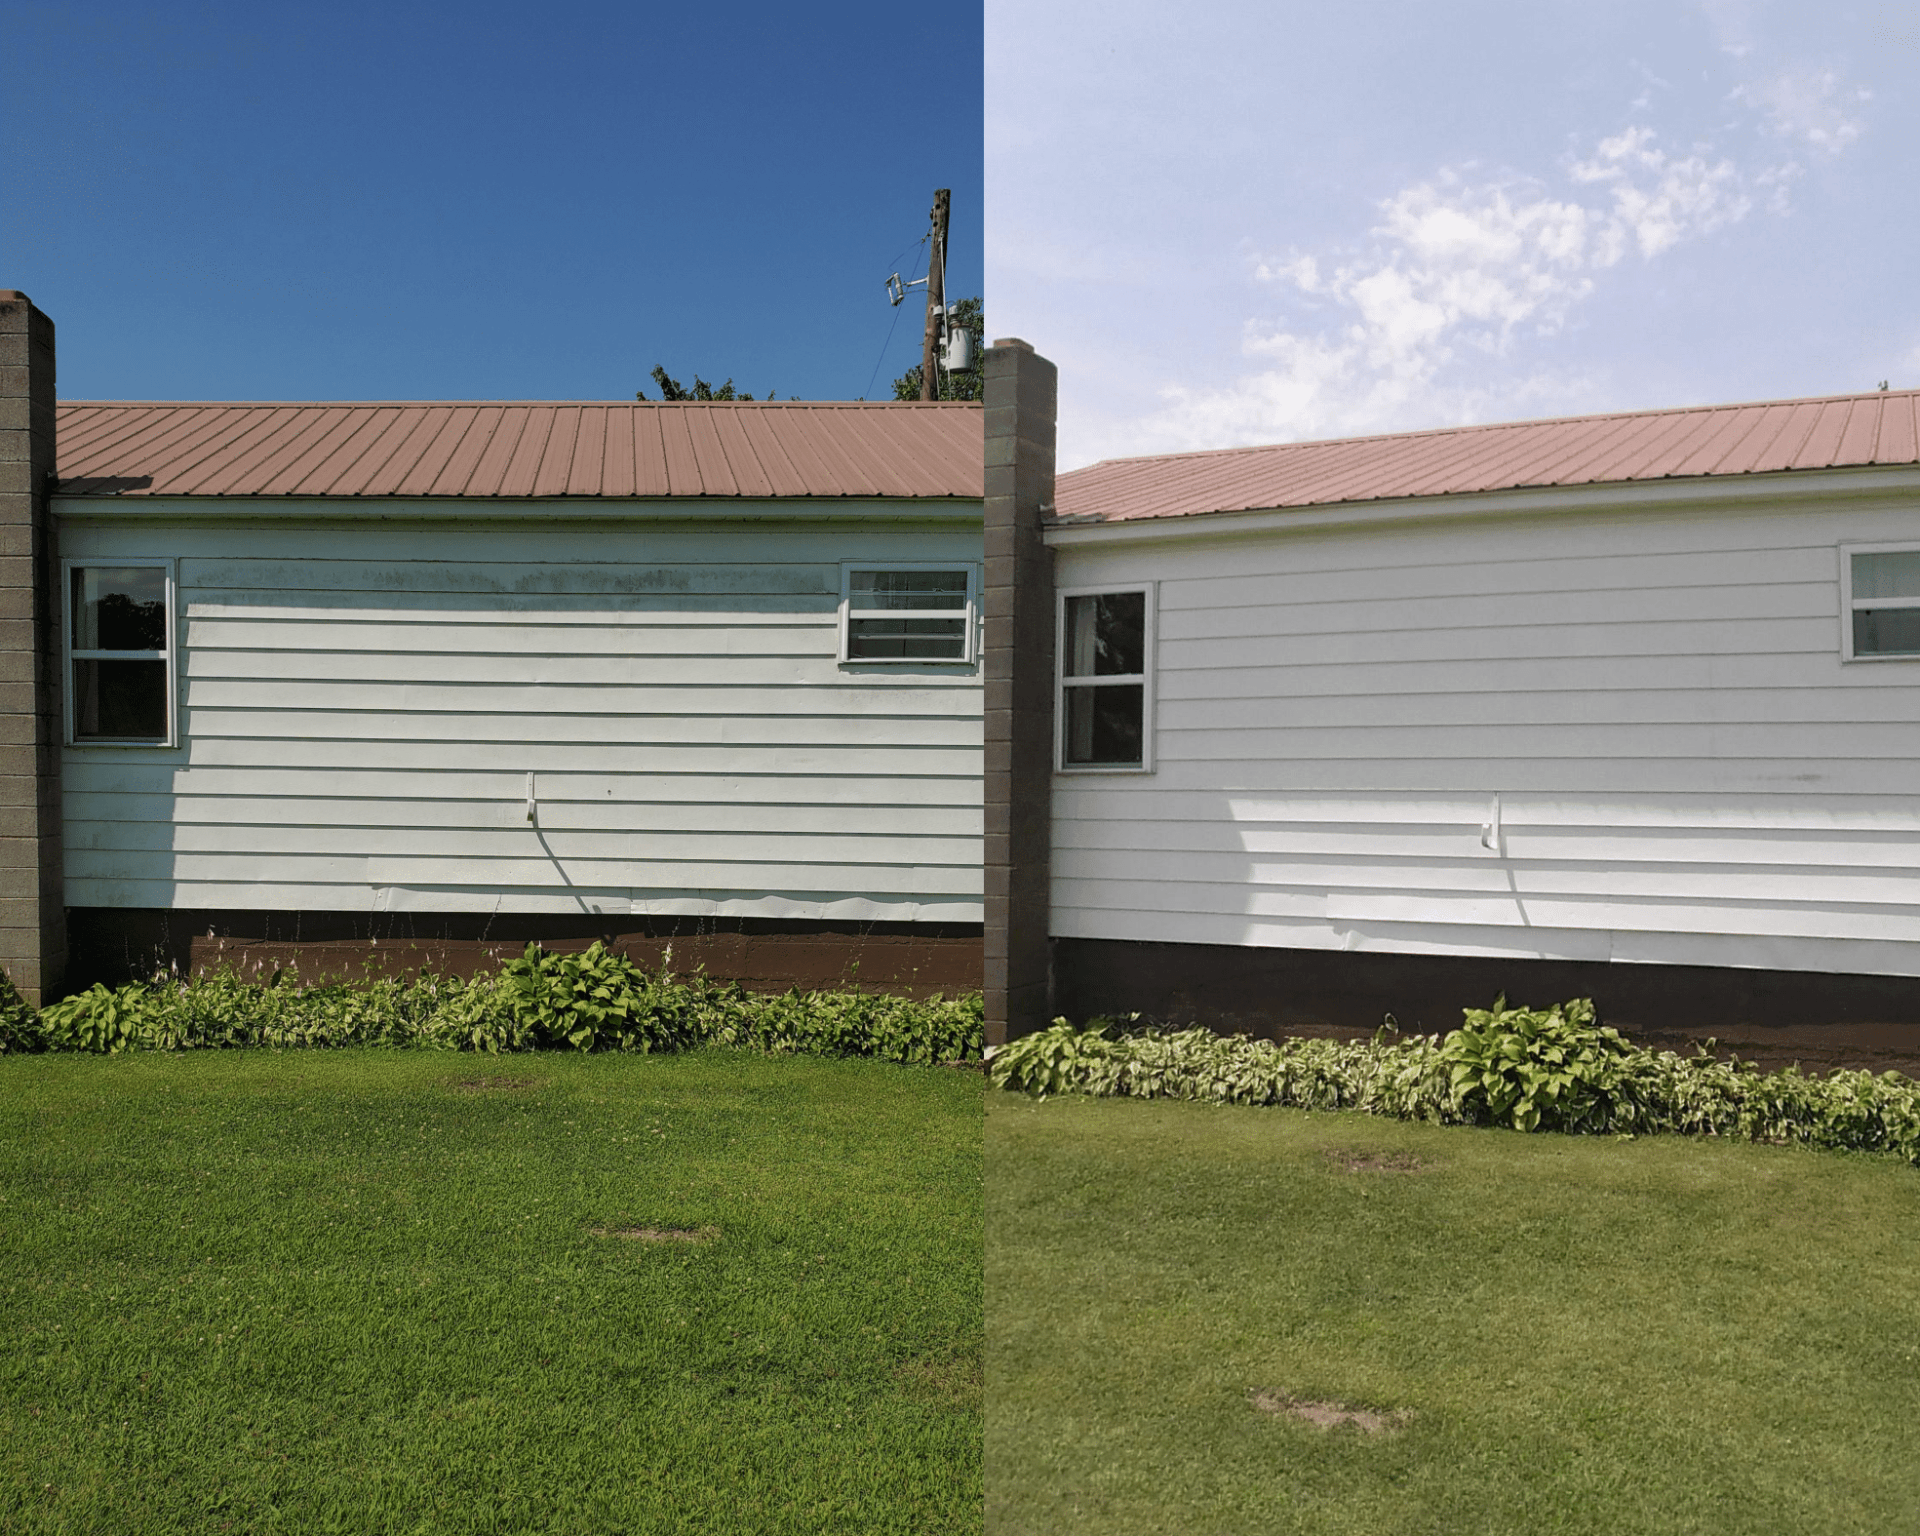 A before and after photo of a mobile home